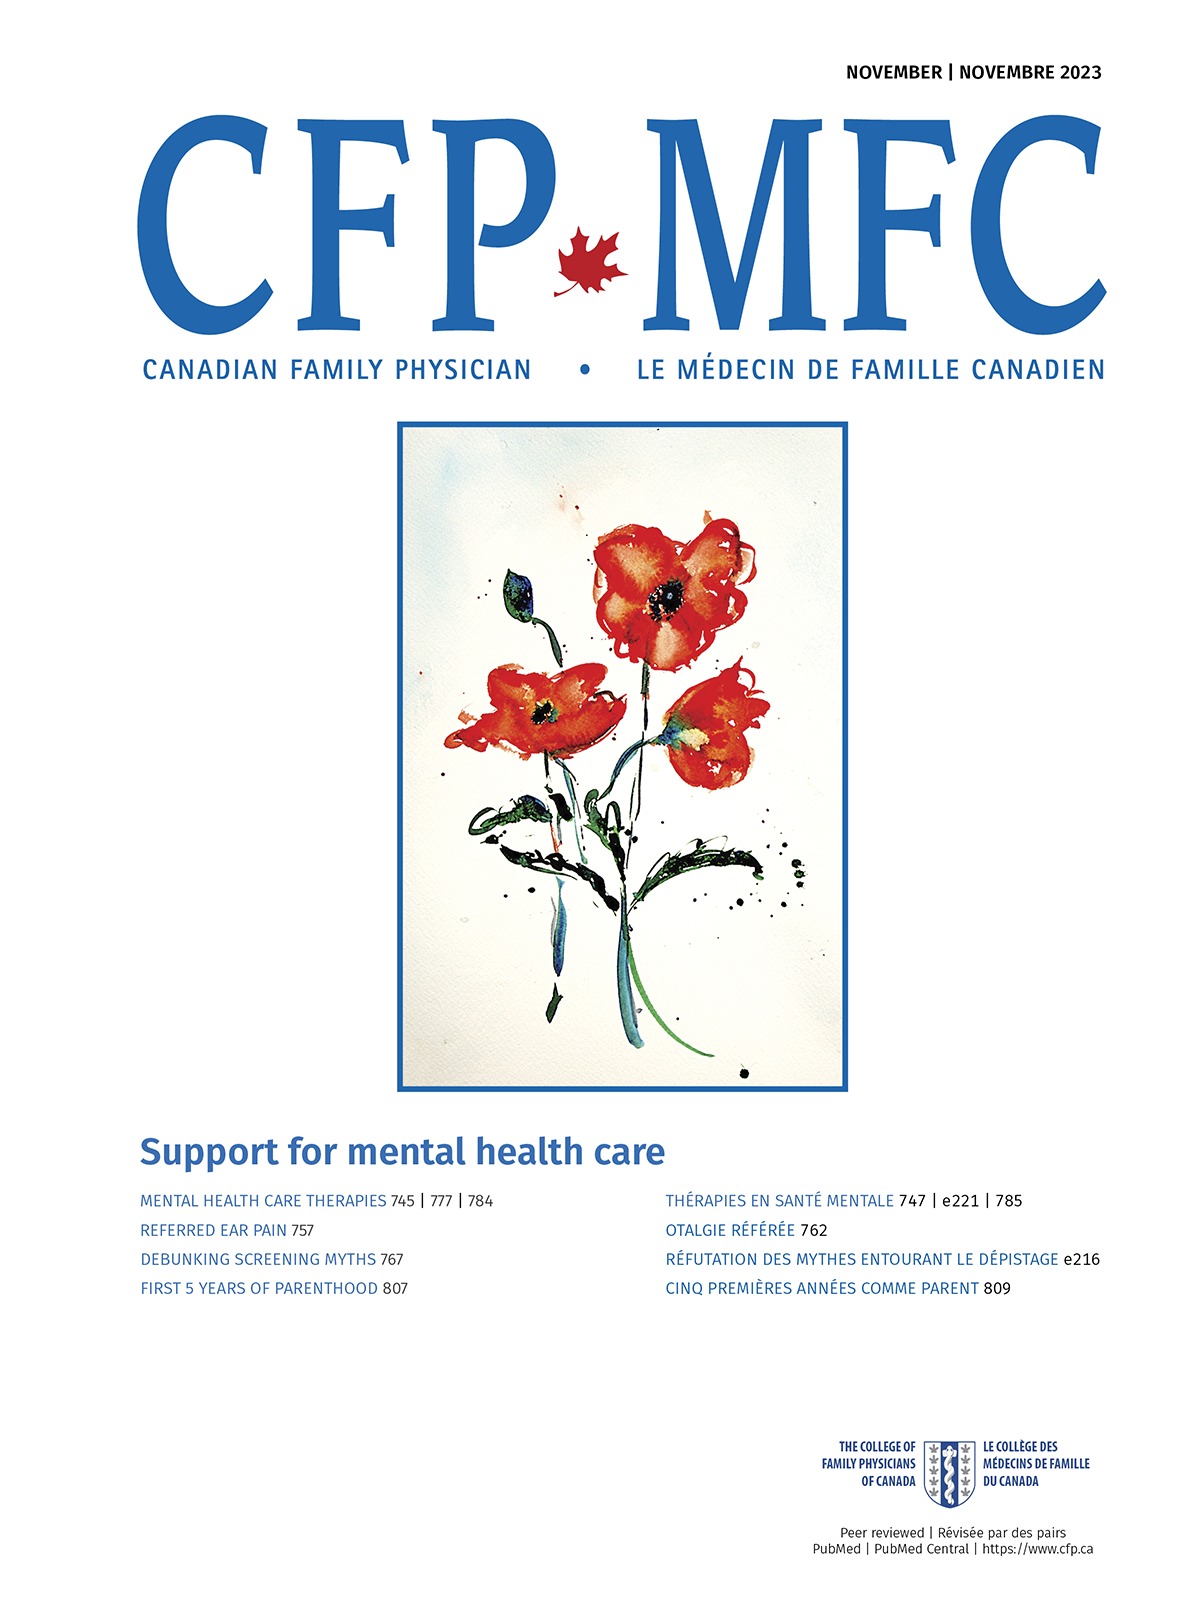 Support for family physicians in the provision of mental health care